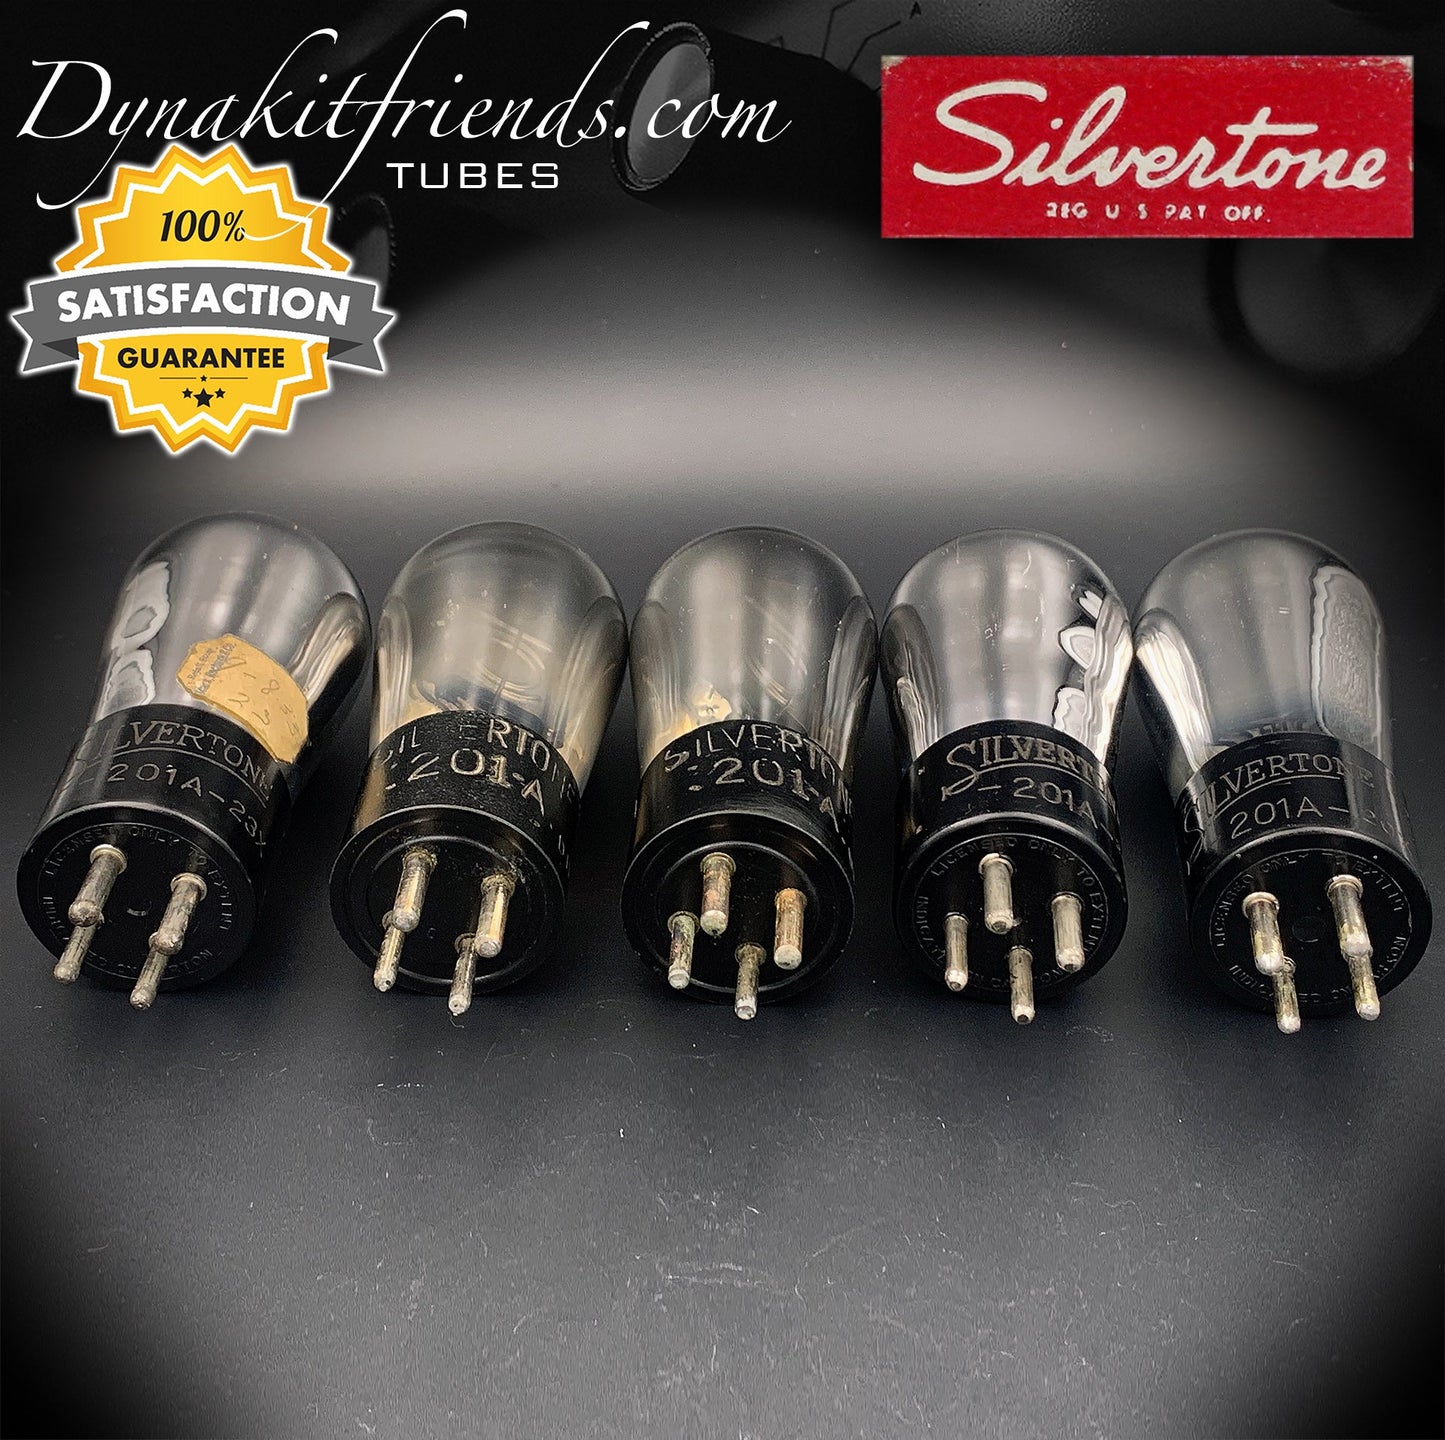 201-A ( 01-A ) SILVERTONE Globe Radio Tubes Test @ NOS specs Matched Tubes Made in USA '20s - Vacuum Tubes Treasures